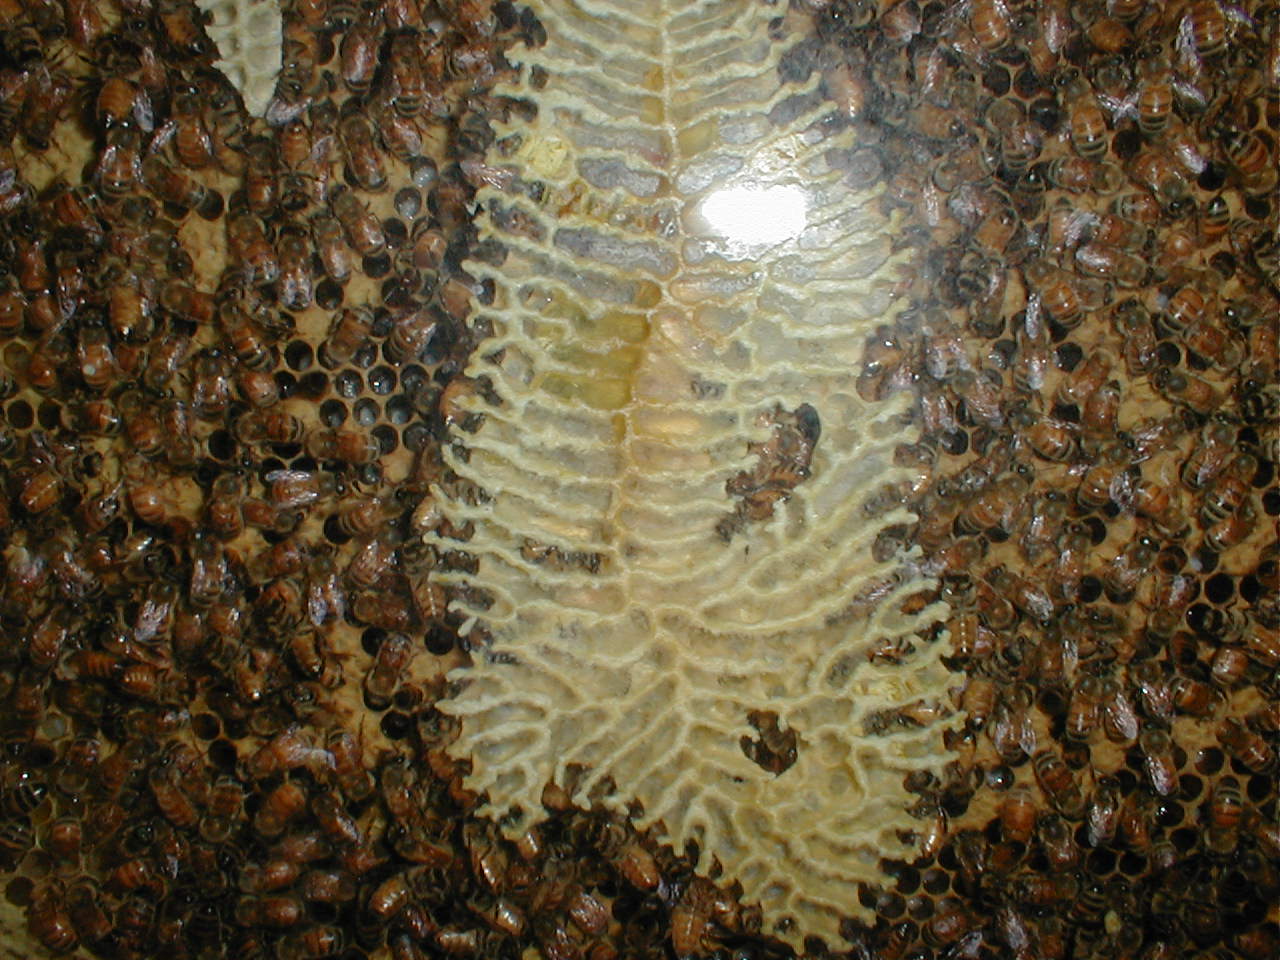 Bees in their Hive